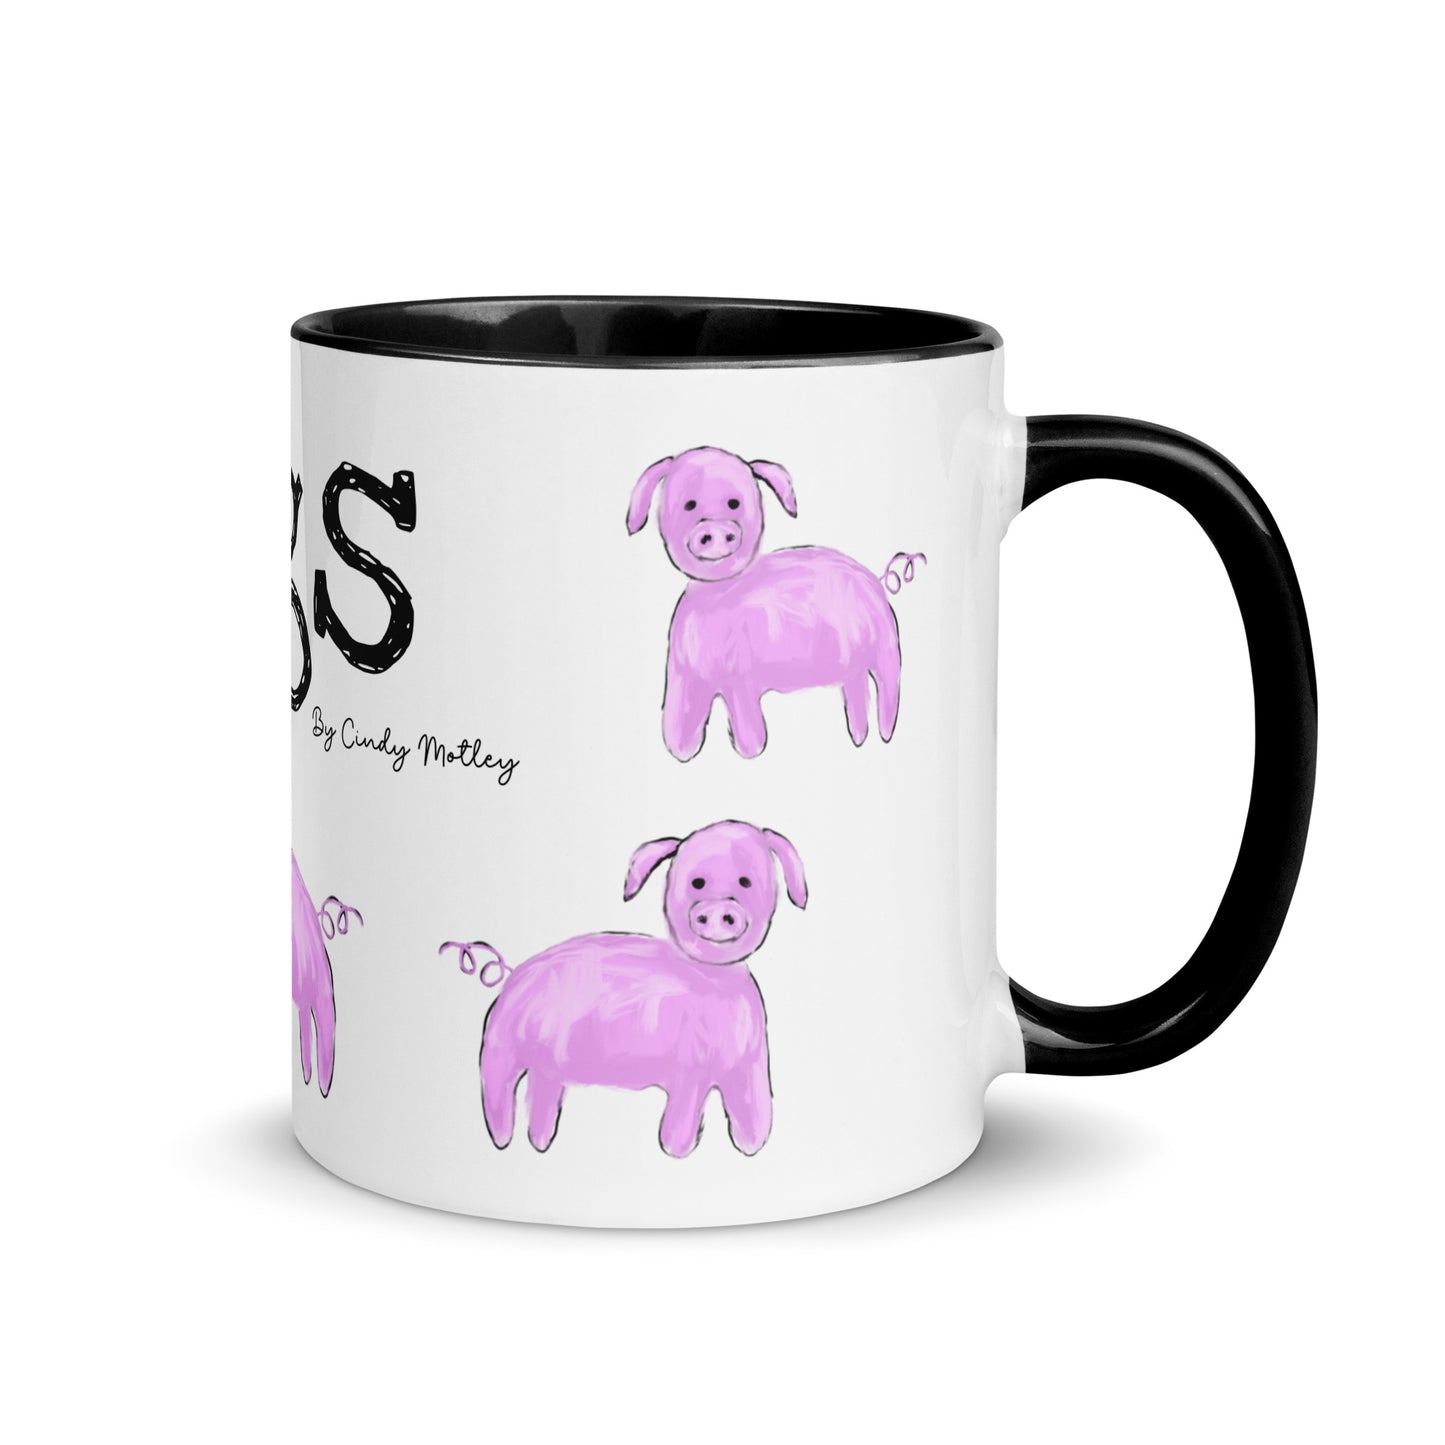 Pigs By Cindy Motley Mug with Color Inside